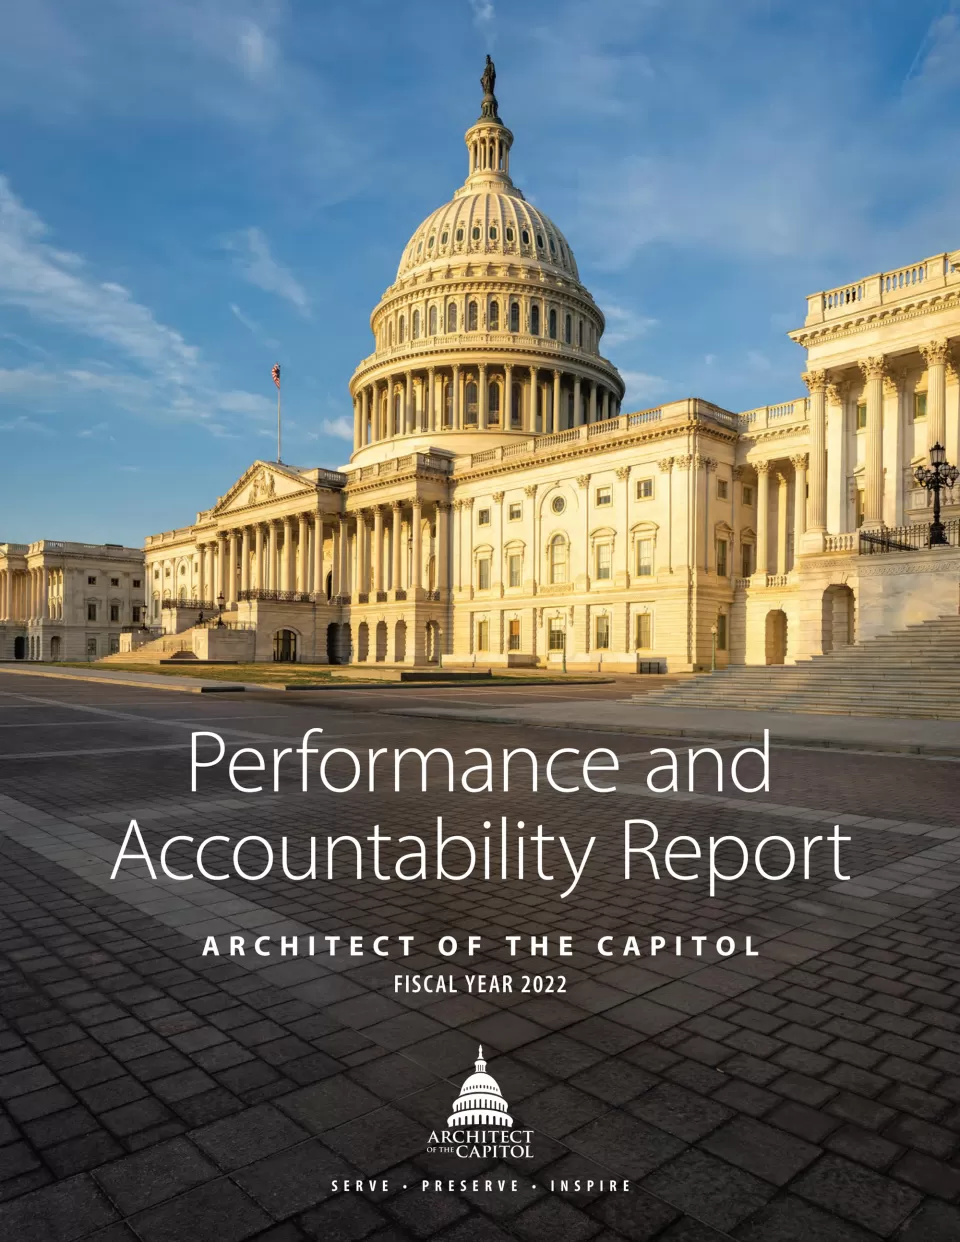 Cover image for the Architect of the Capitol's FY 2022 Performance and Accountability Report.